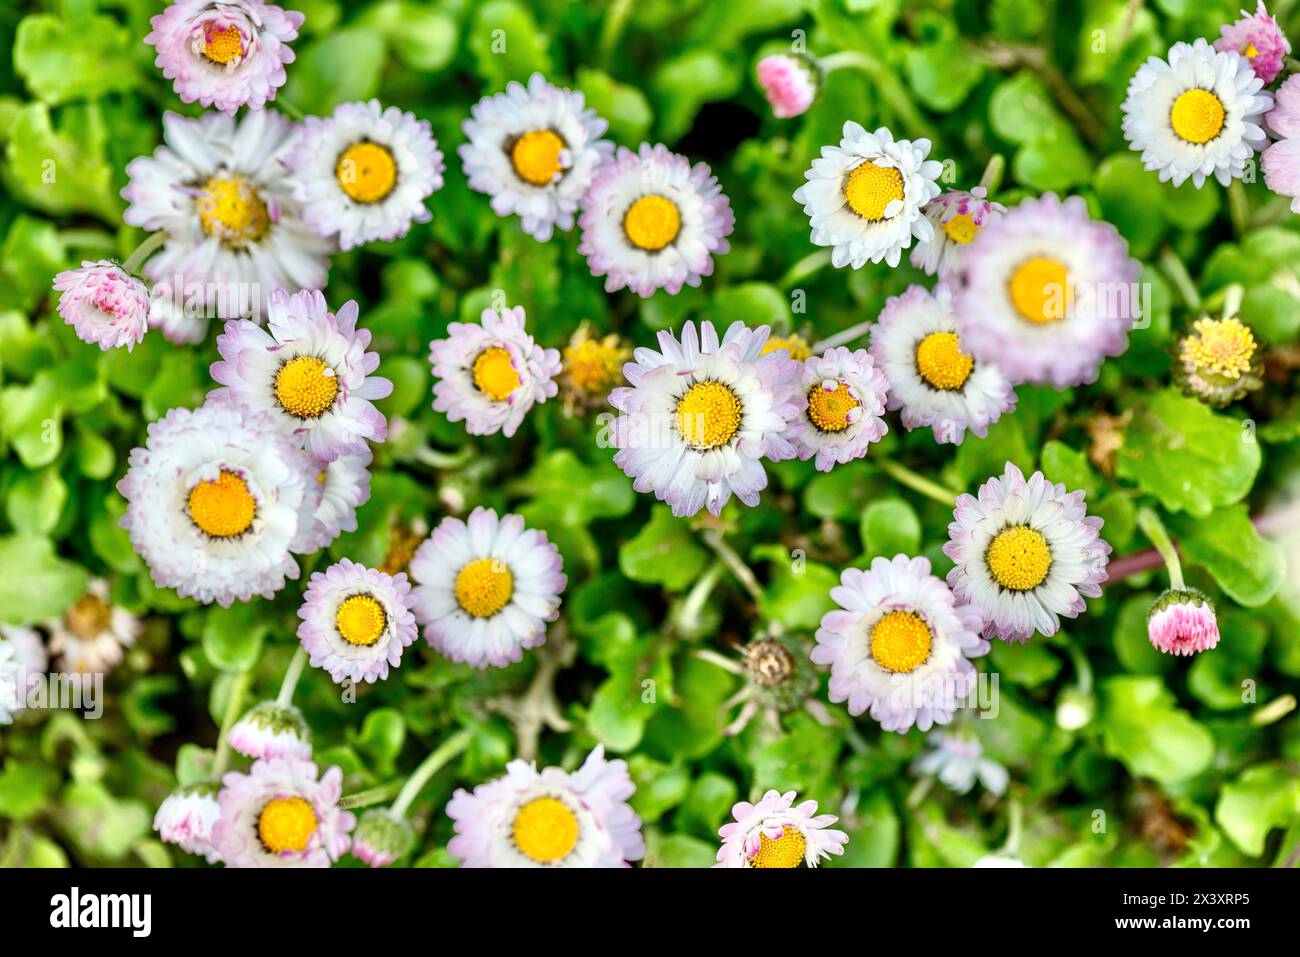 Daisy (lat. Bellis) is a genus of perennial plants from the Asteraceae family. Daisy. Inflorescence of perennial daisy (Bellis perennis) Stock Photo